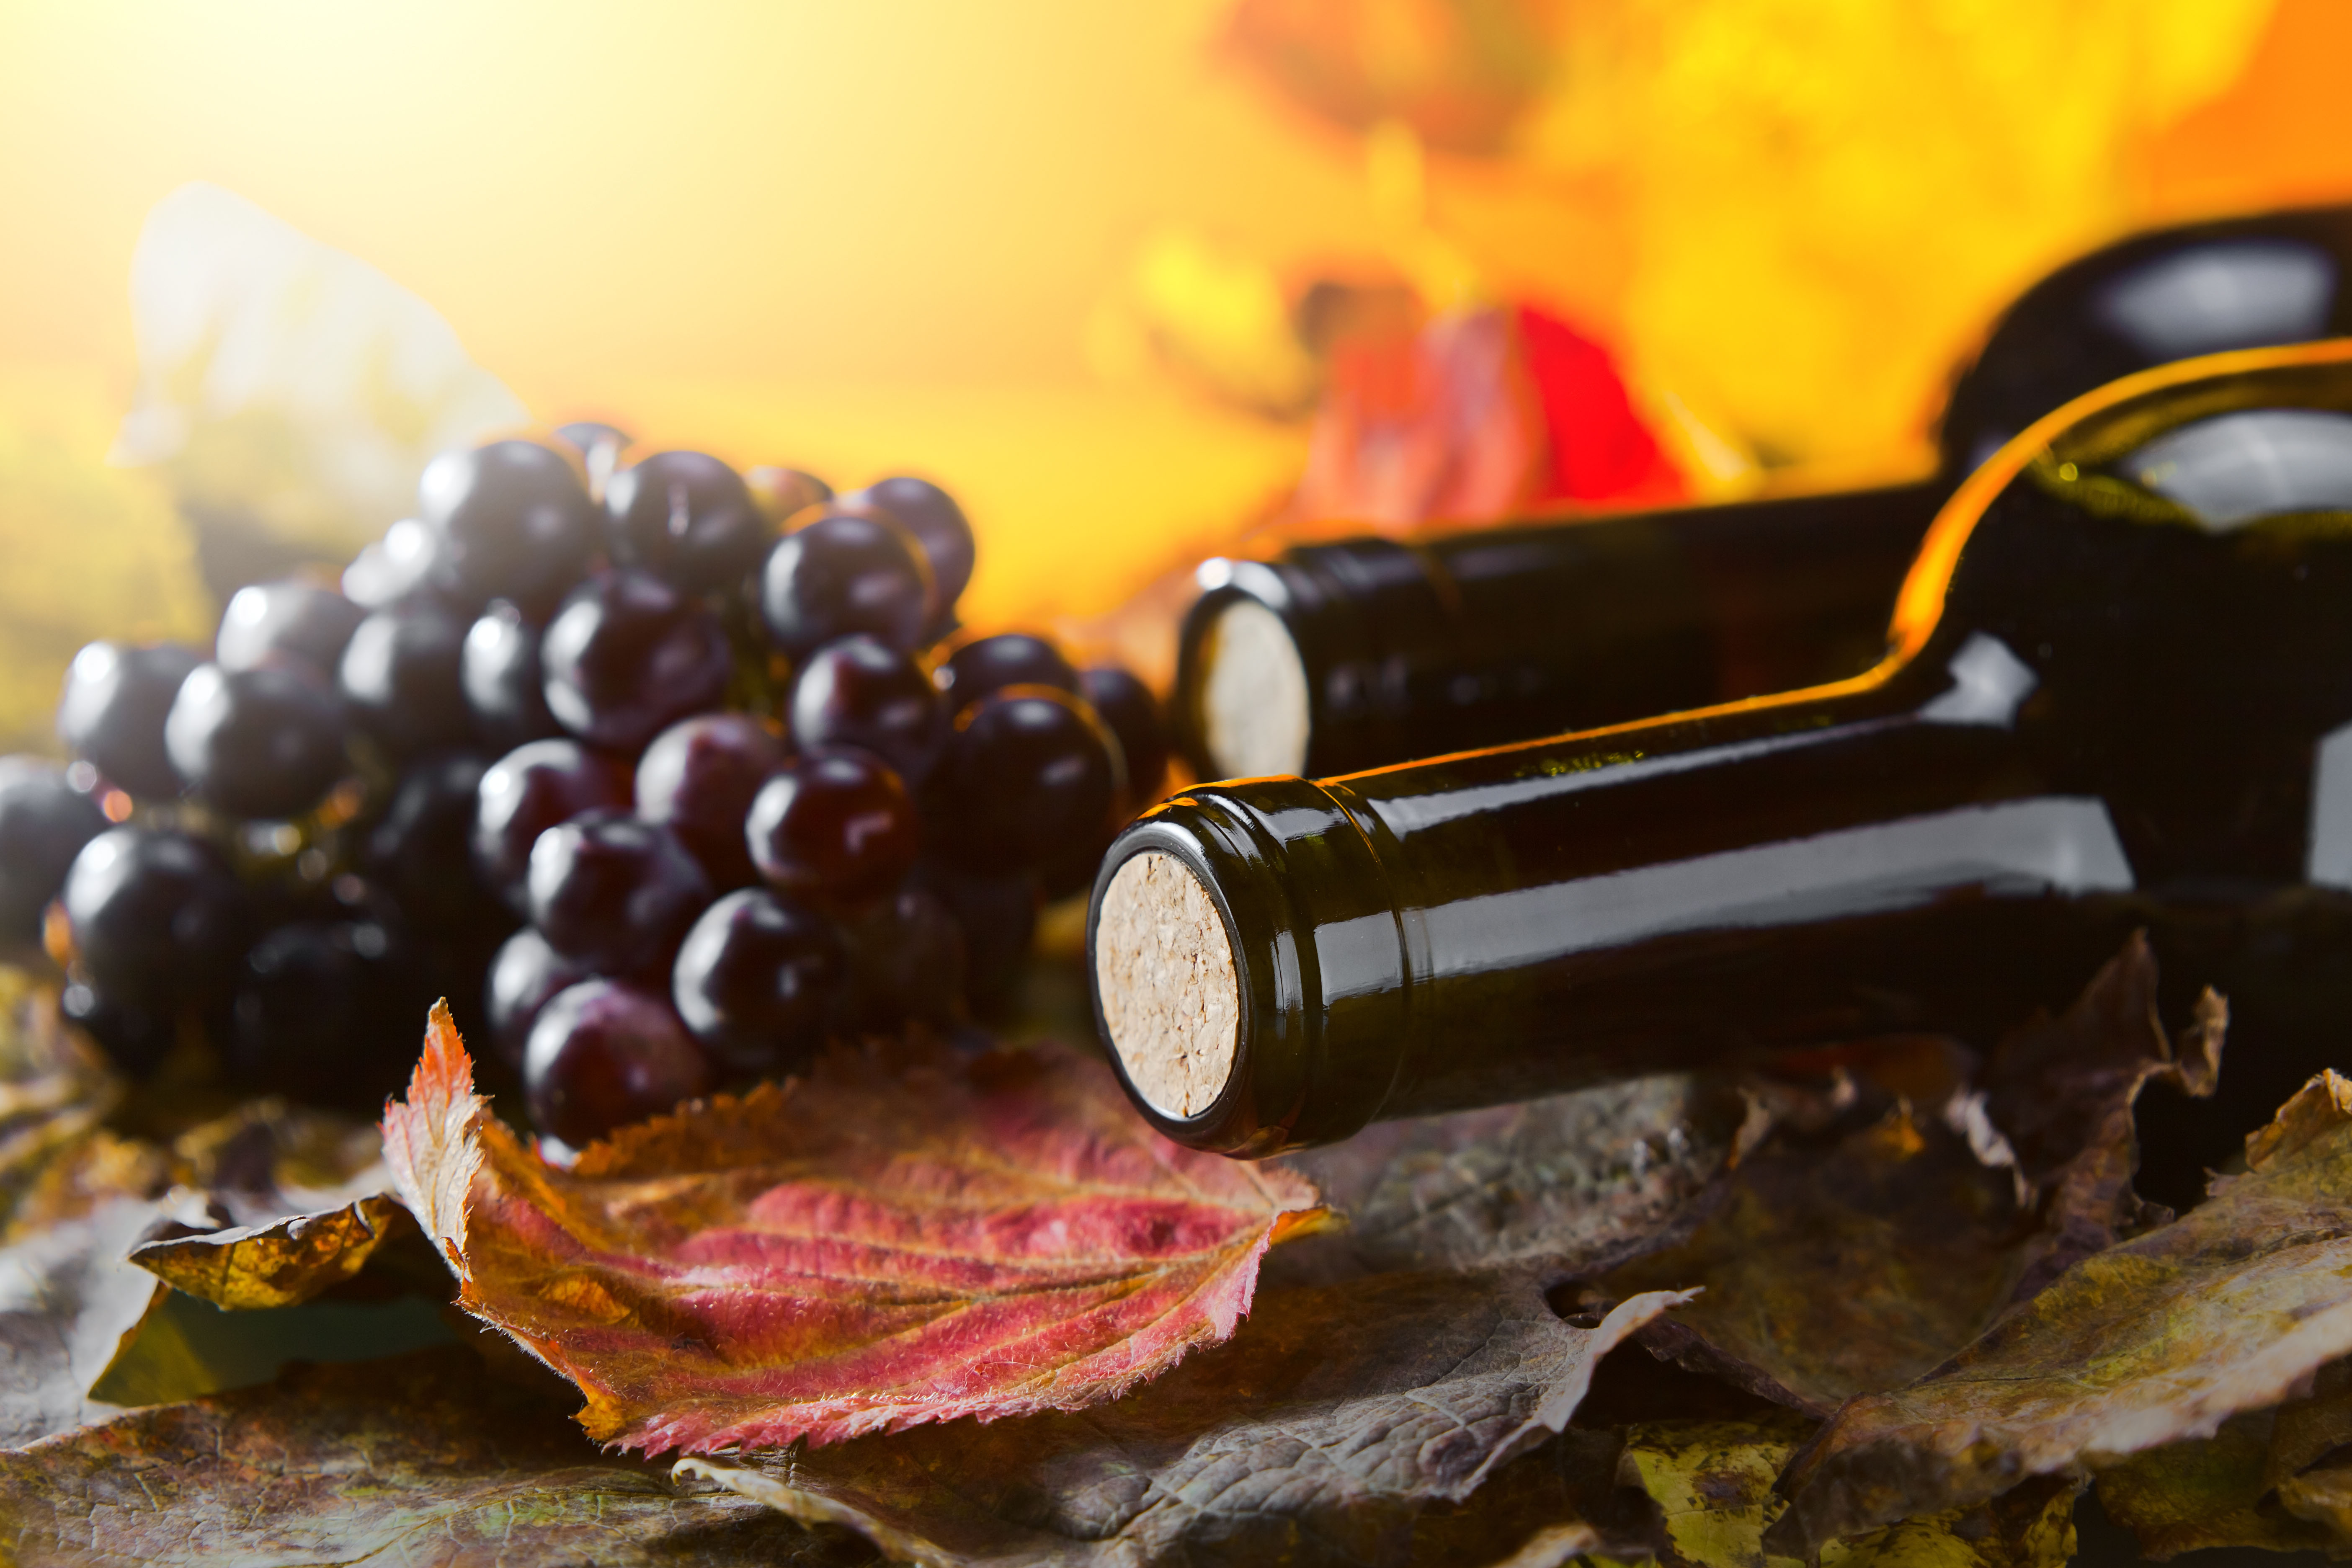 cabernet sauvignon bottles tops showing lying on bed of colored leaves and bunch of cabernet grapes